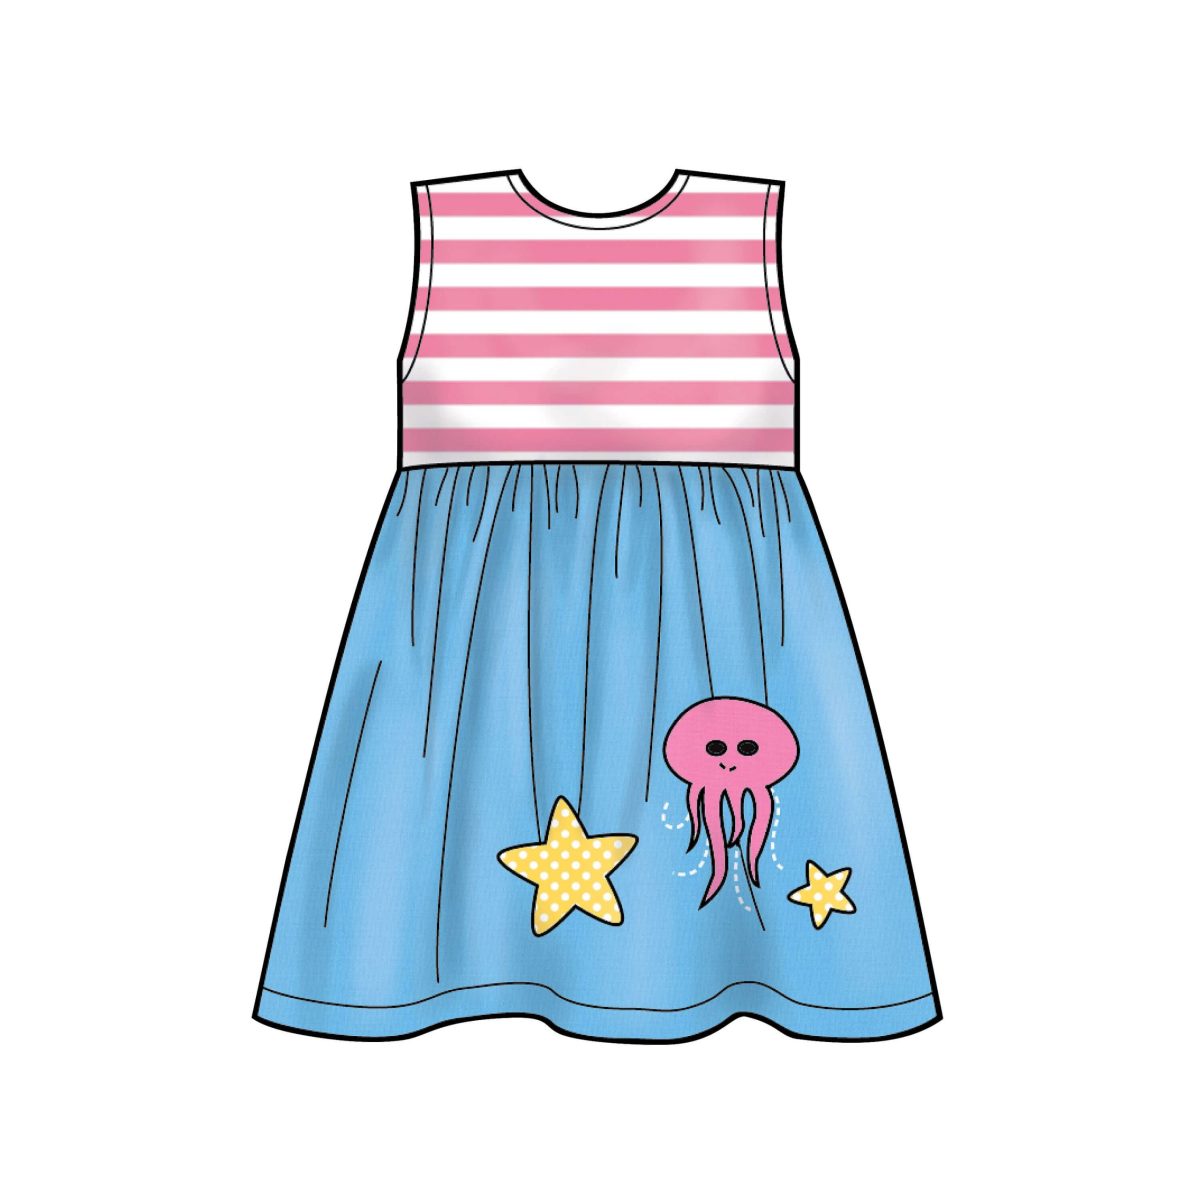 New Look Sewing Pattern N6647 Toddlers' Dresses with Appliques